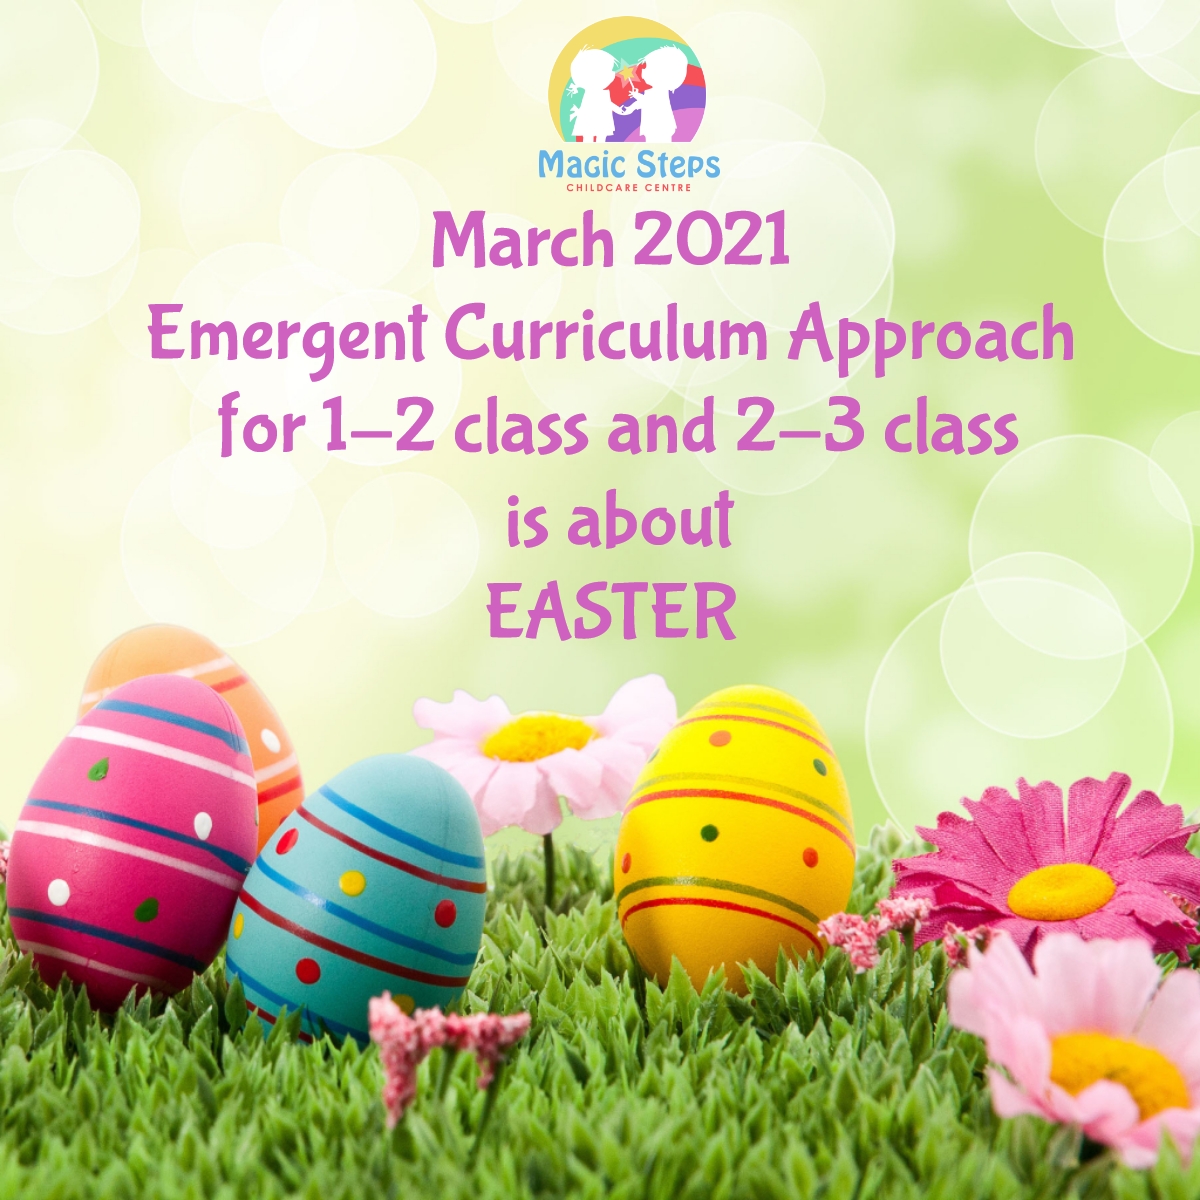 Project Approach 1-2 and 2-3 class for March